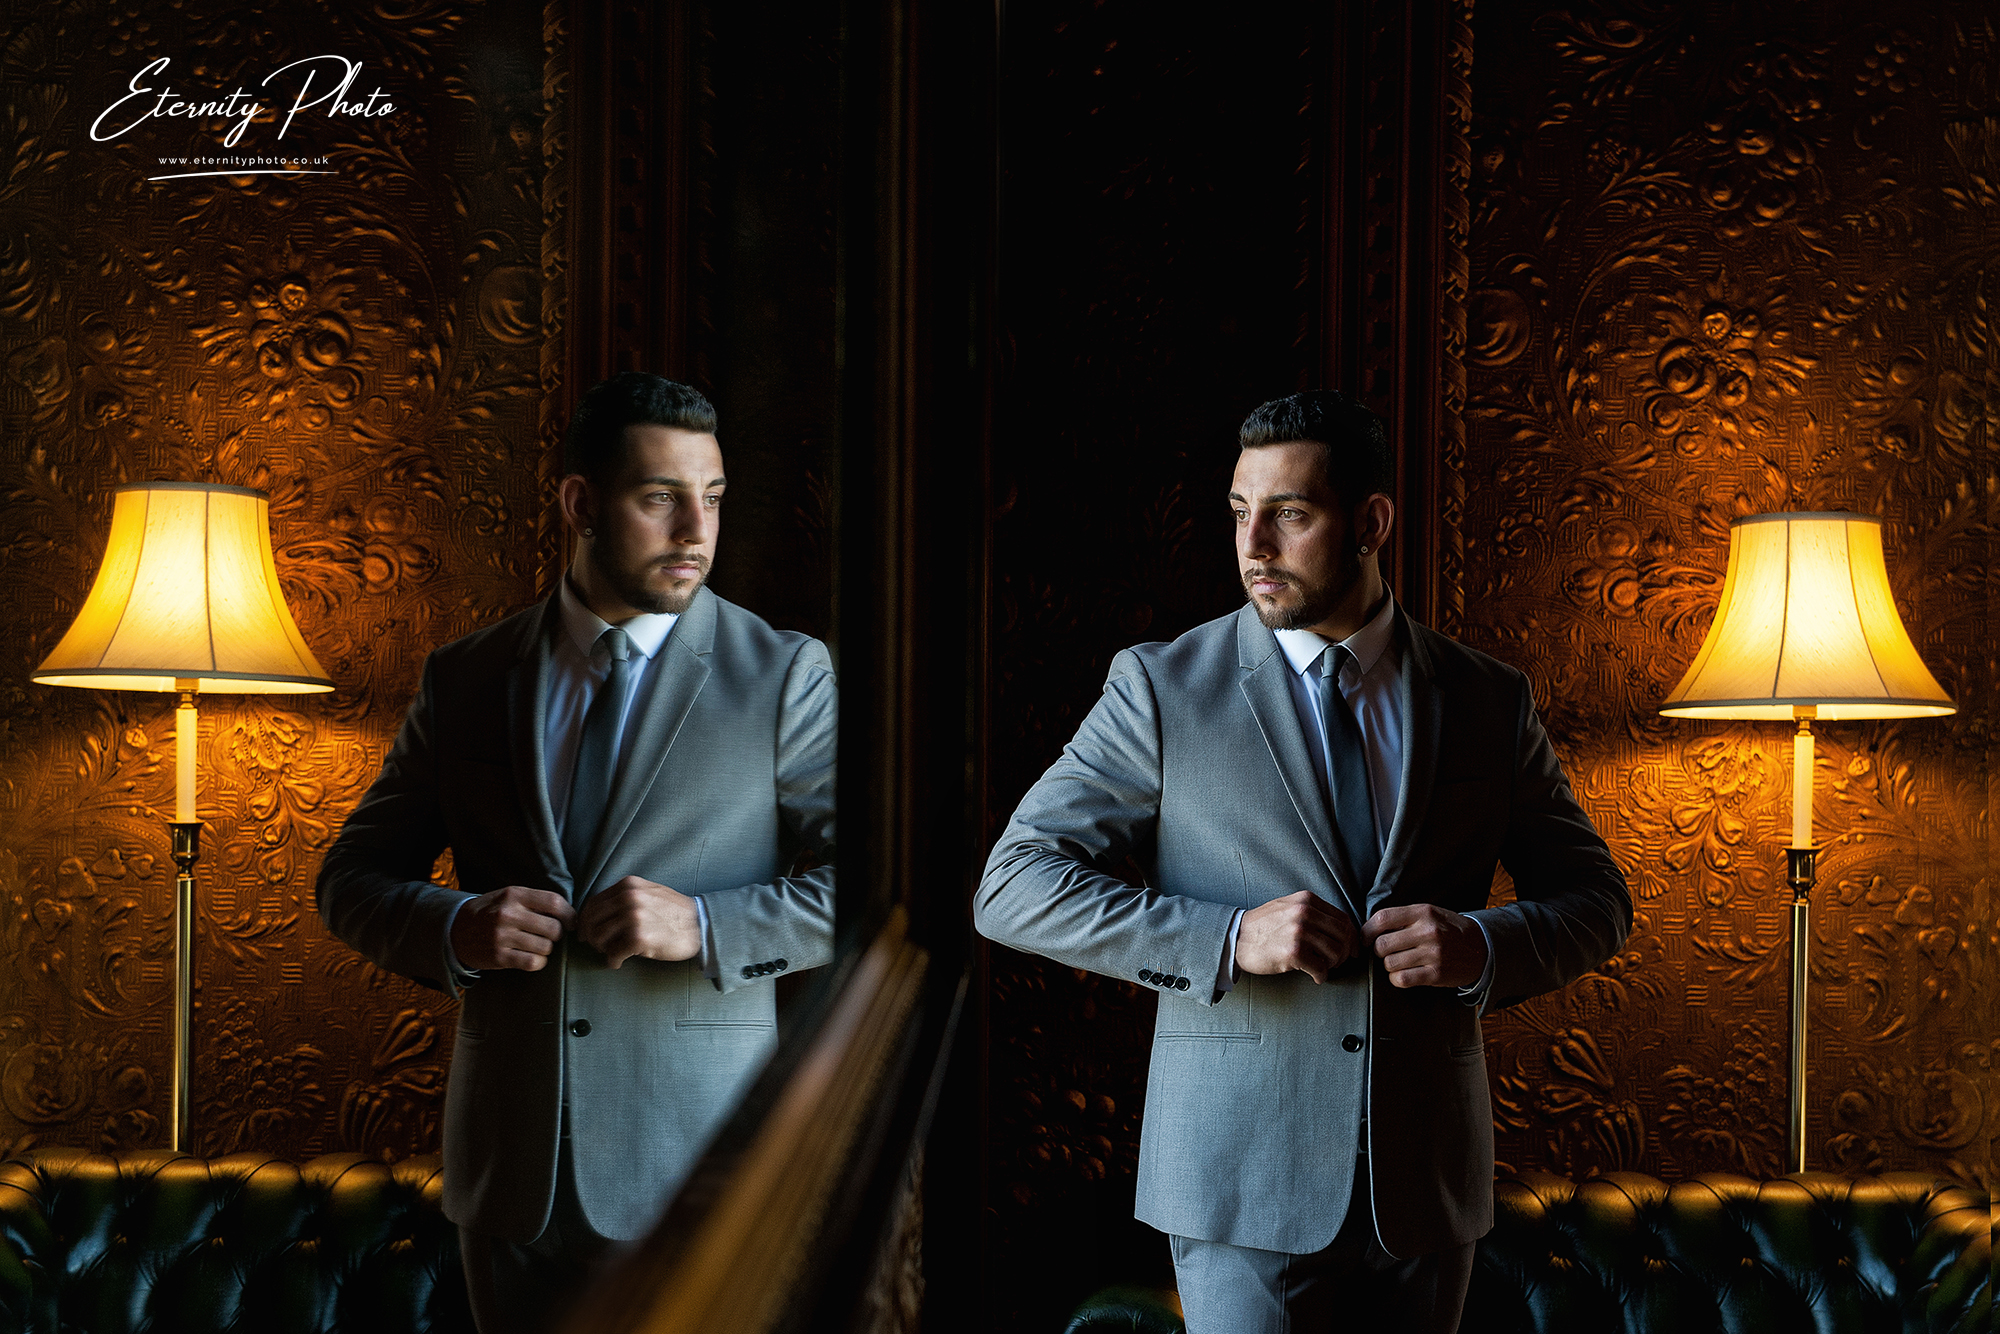 Man in suit with reflection in vintage room.